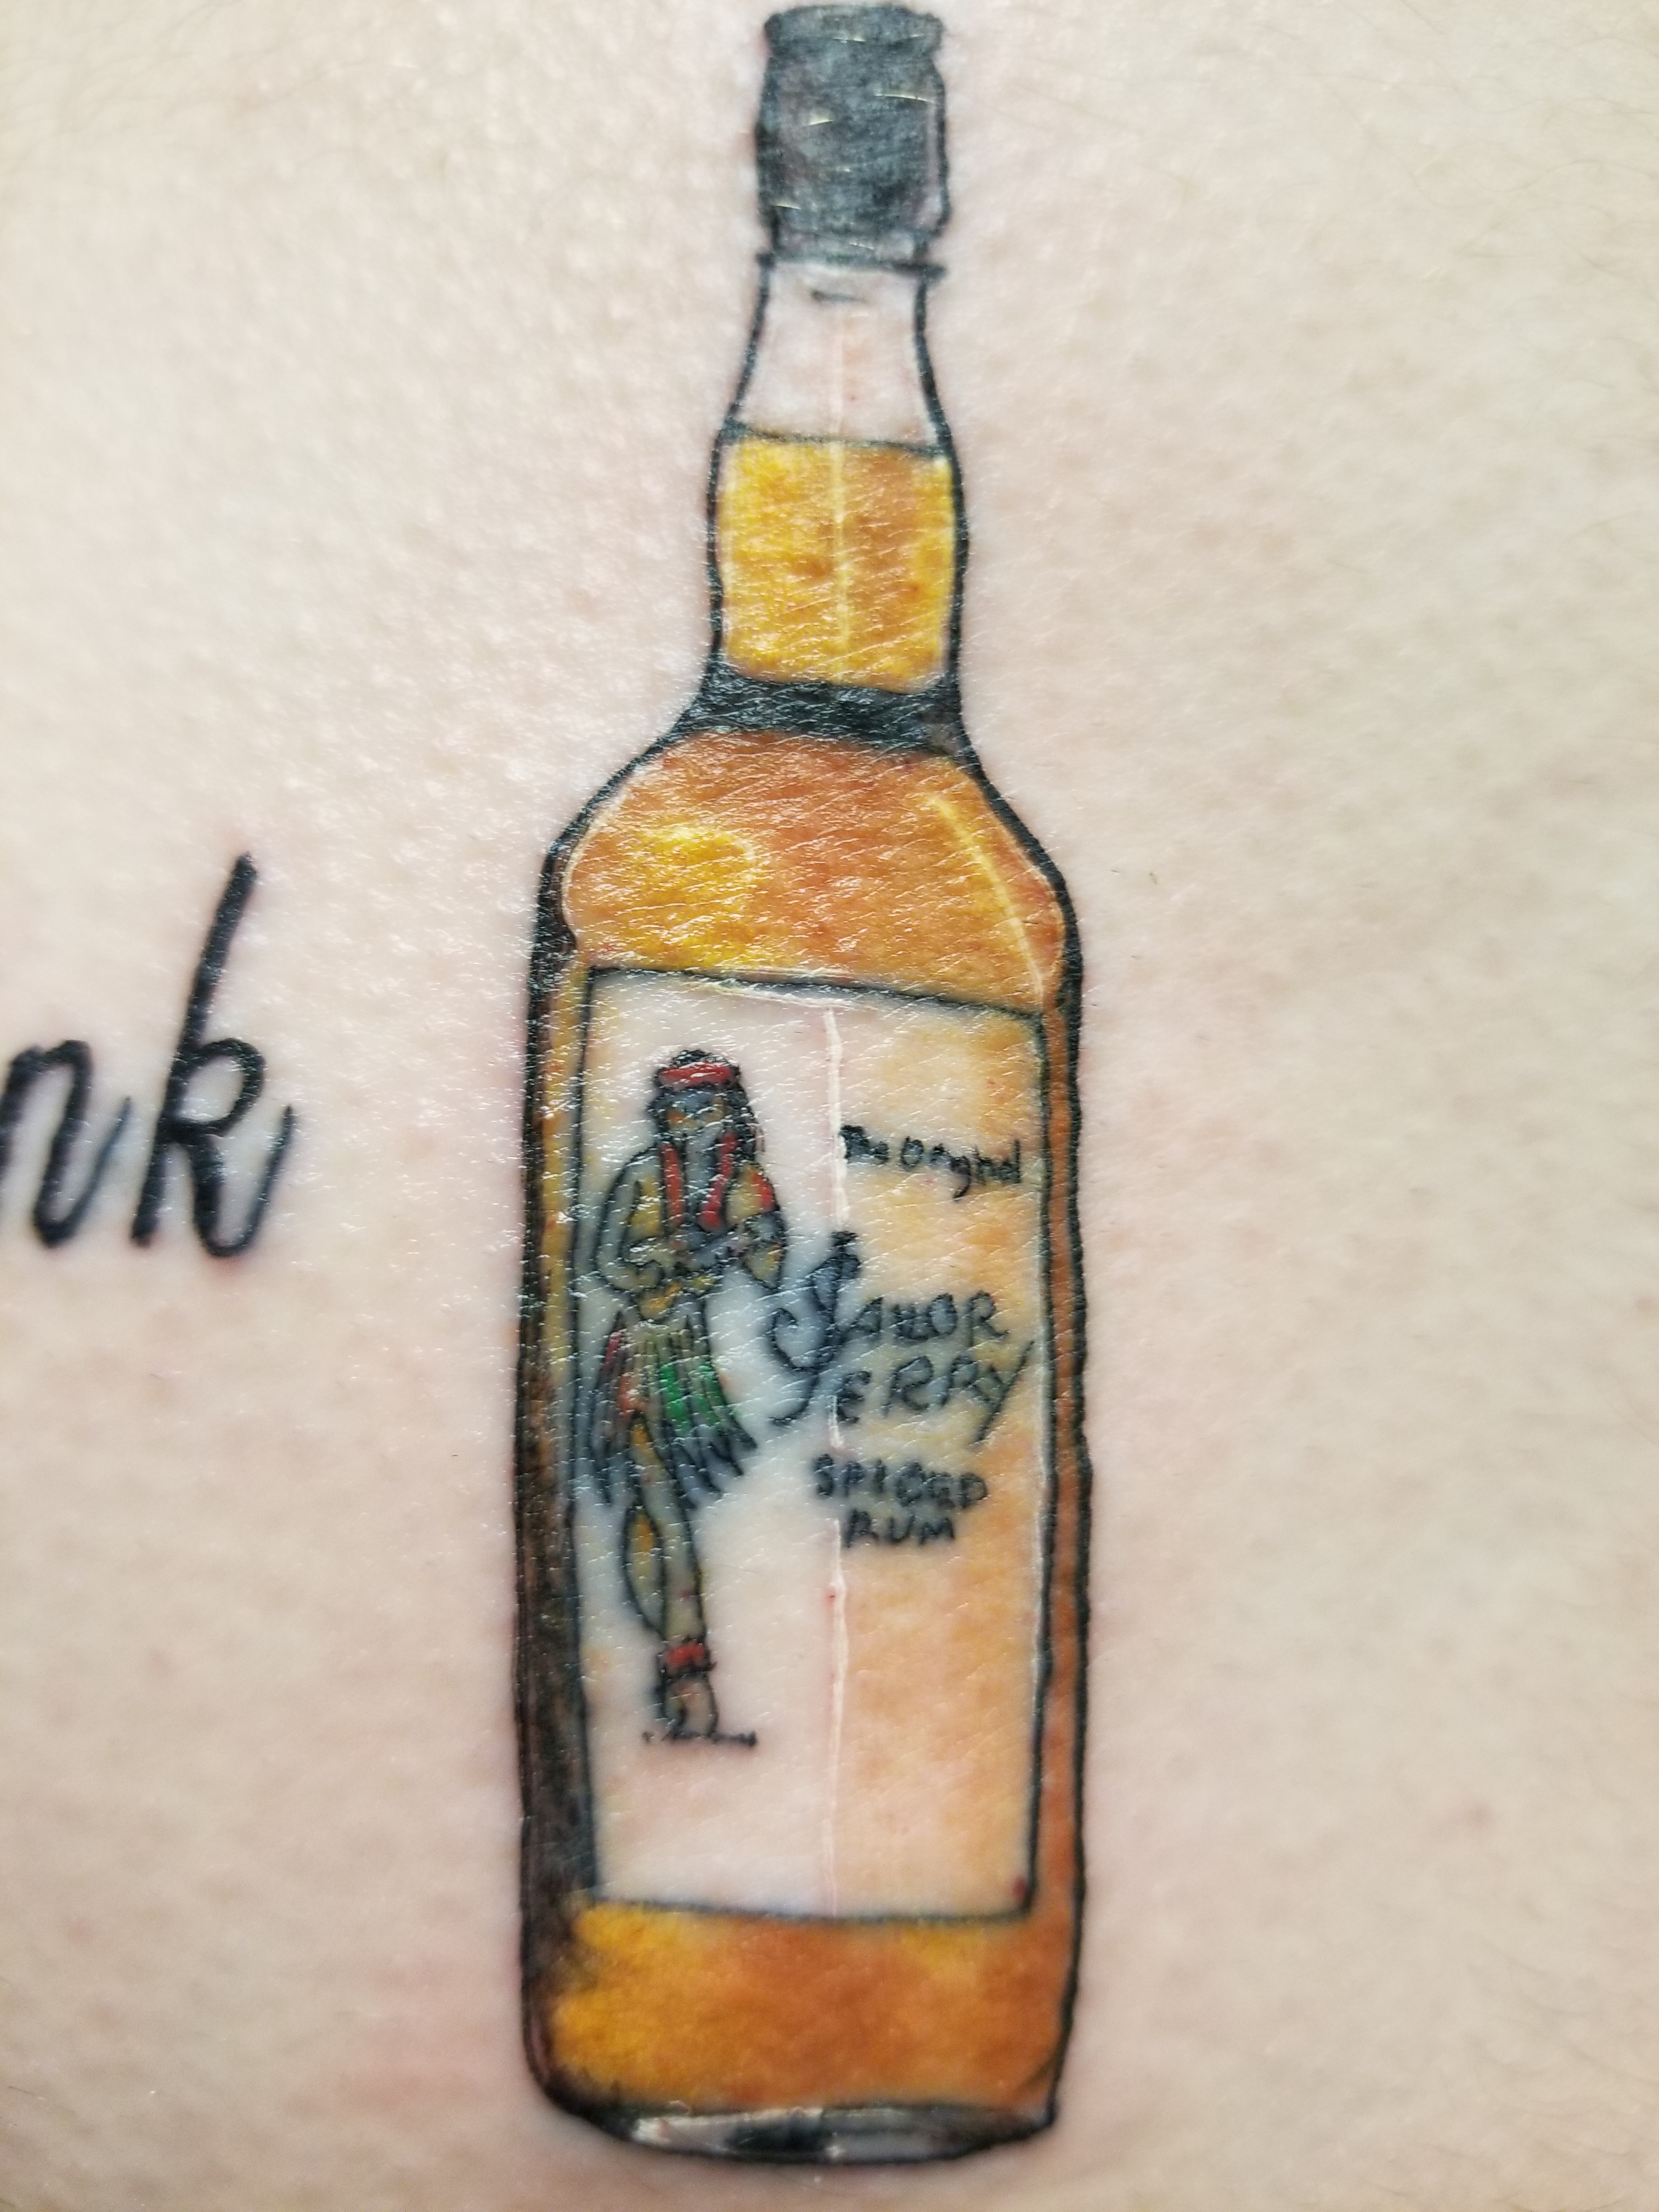 Our New Look | New Sailor Jerry Bottle | Sailor Jerry